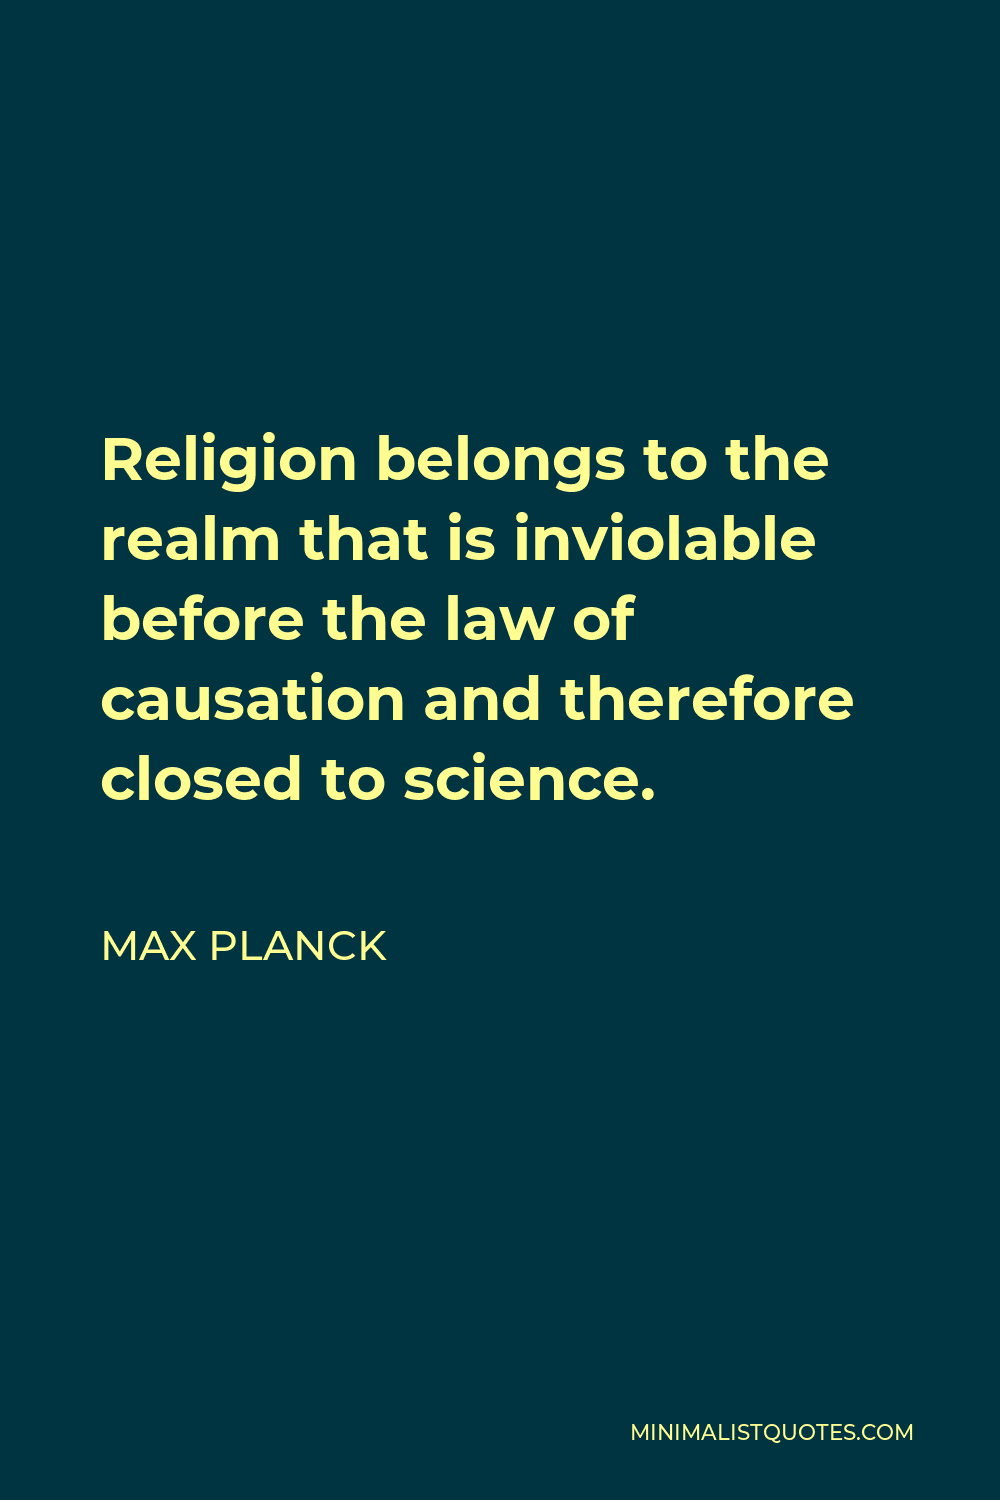 Max Planck Quote - Religion belongs to the realm that is inviolable before the law of causation and therefore closed to science.